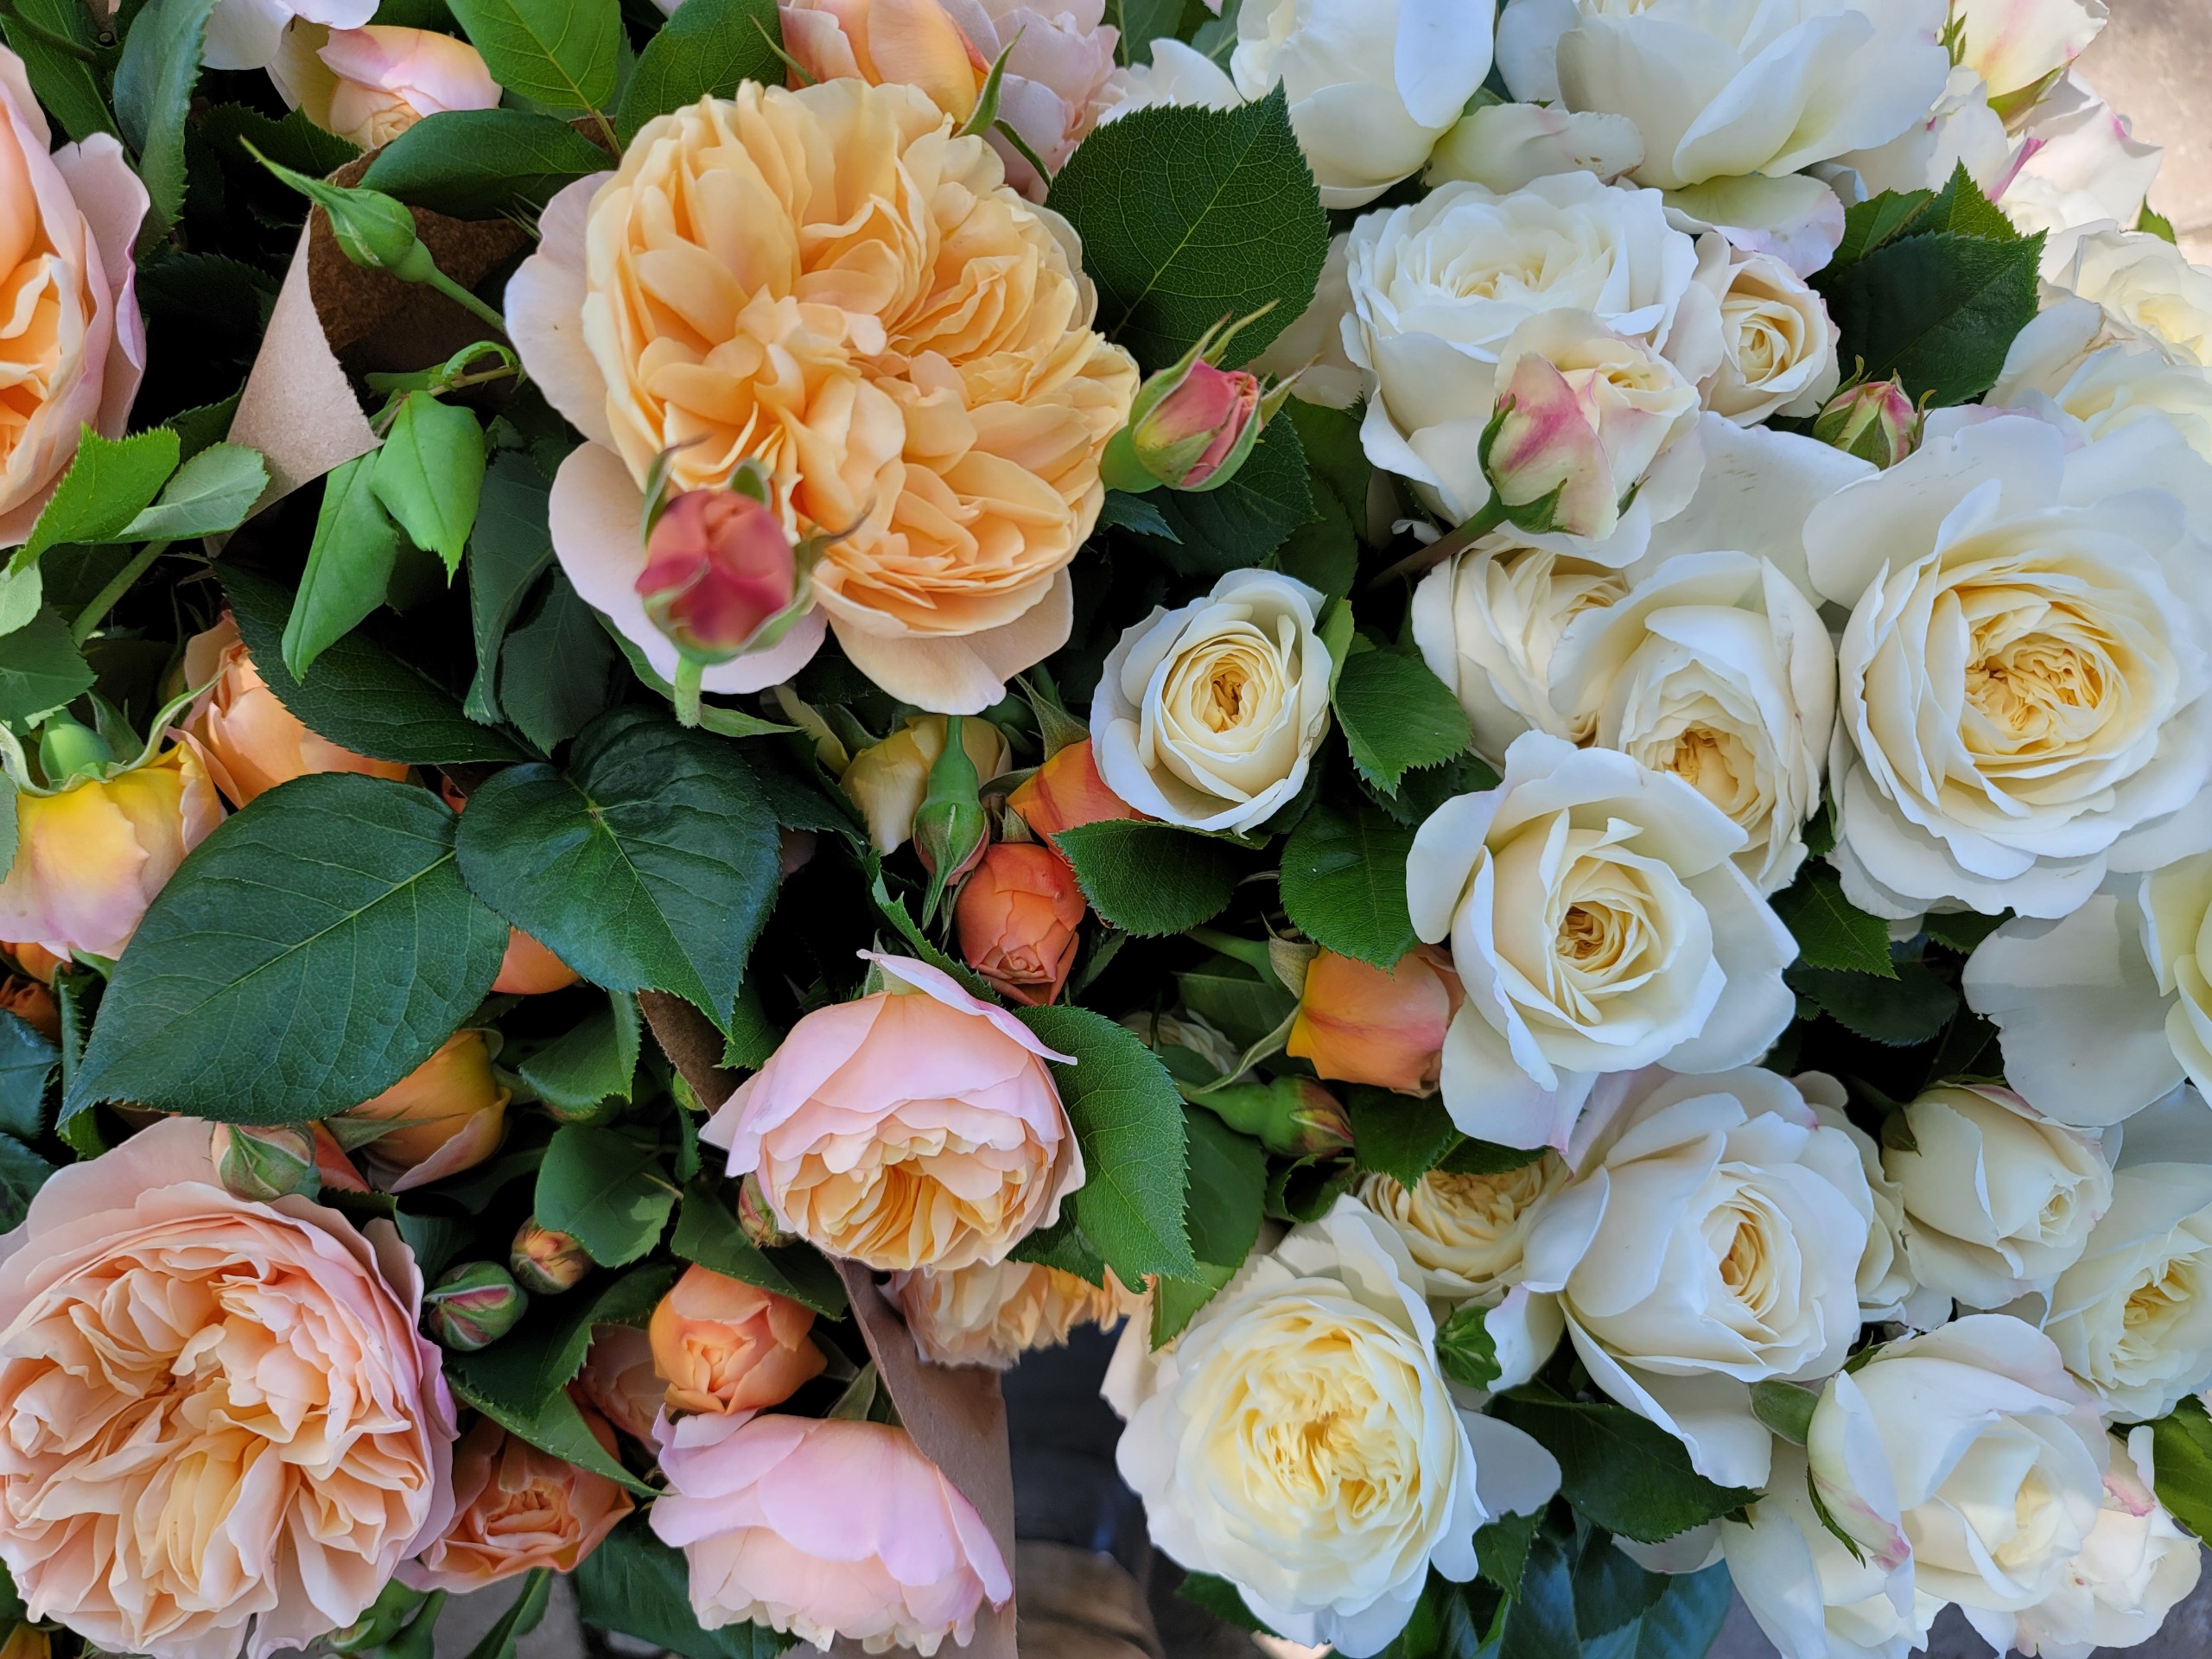 Peach and white roses